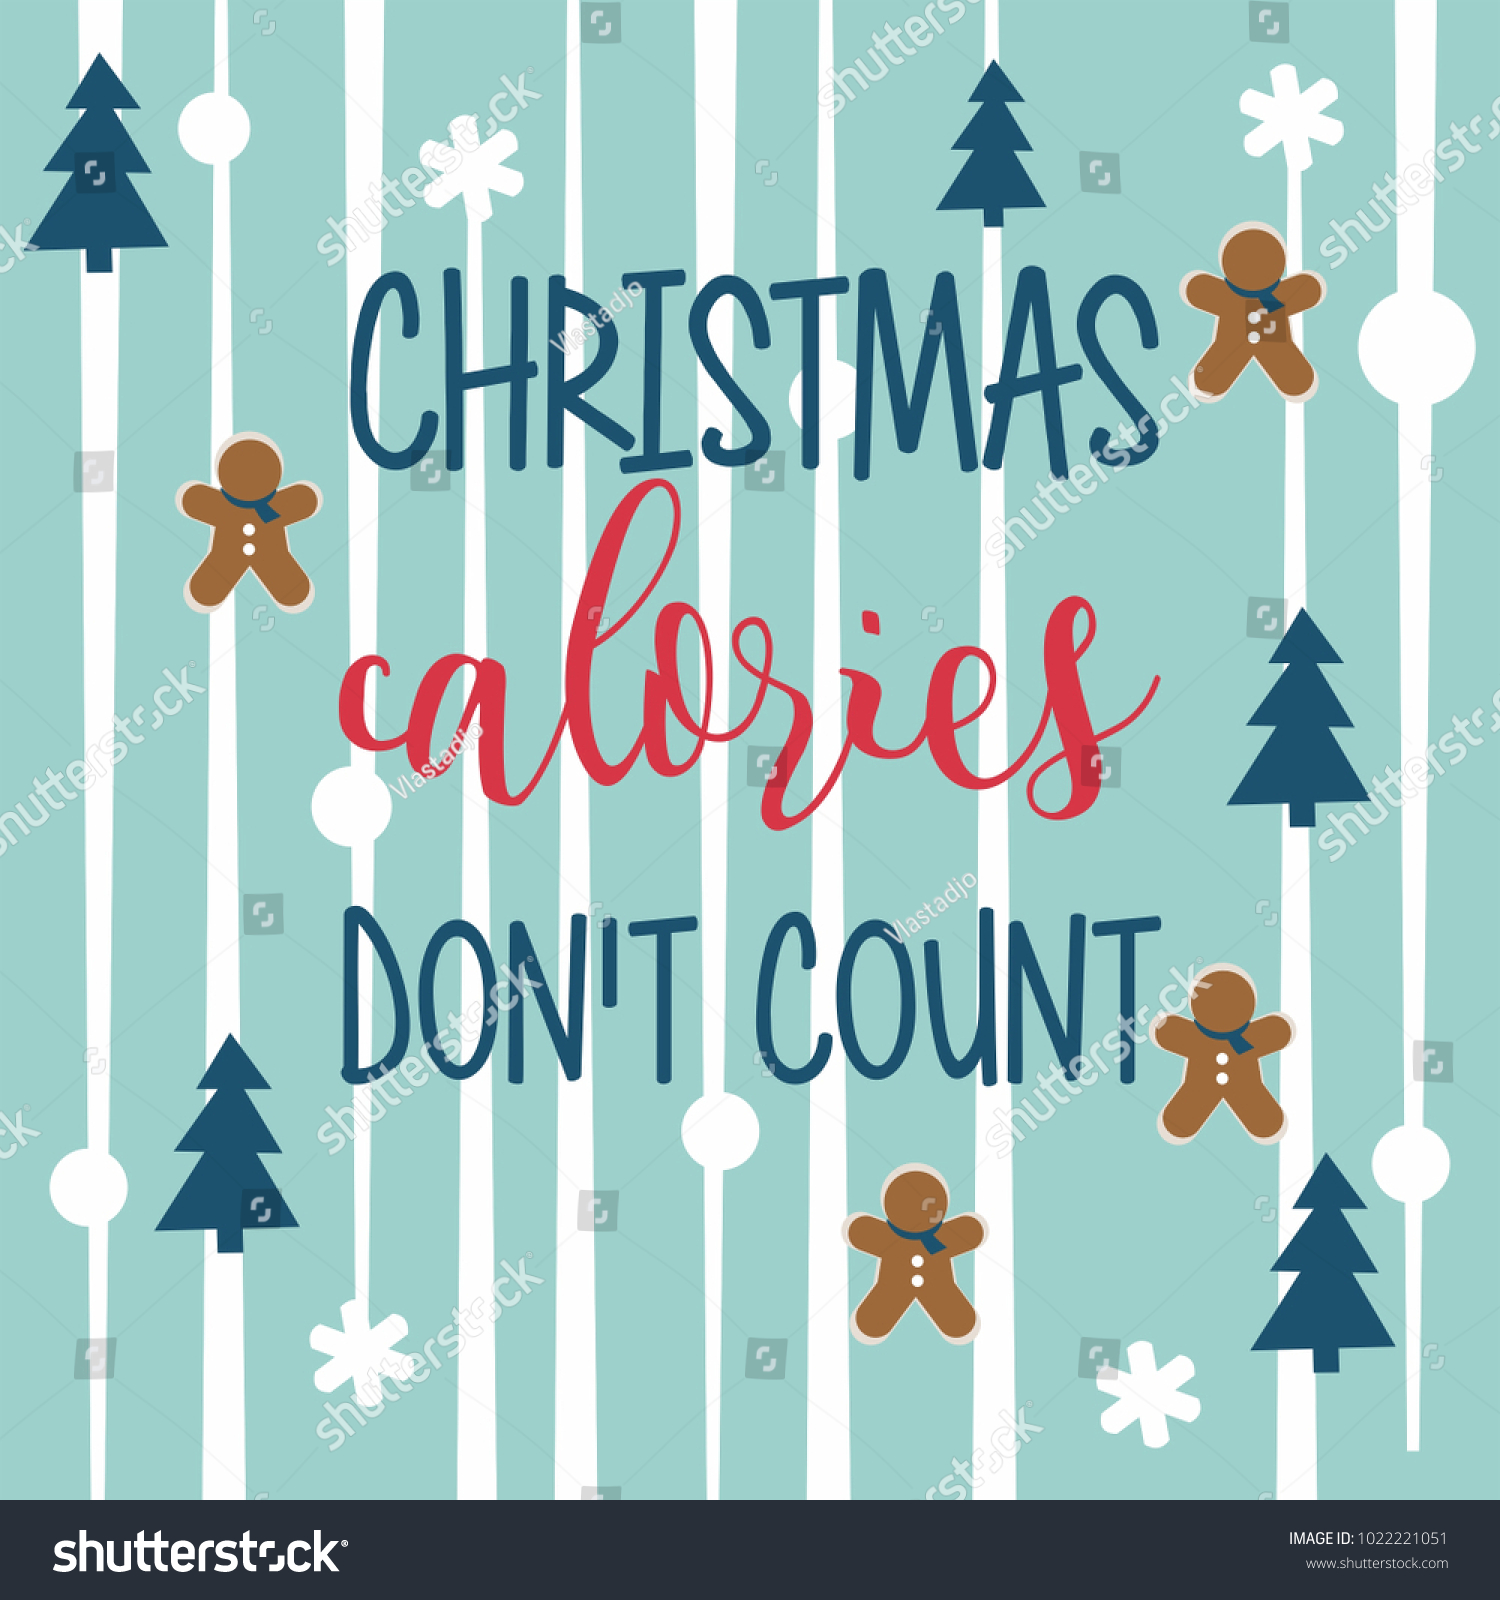 Christmas Calories Dont Count Vector Illustration Stock Vector (Royalty .....